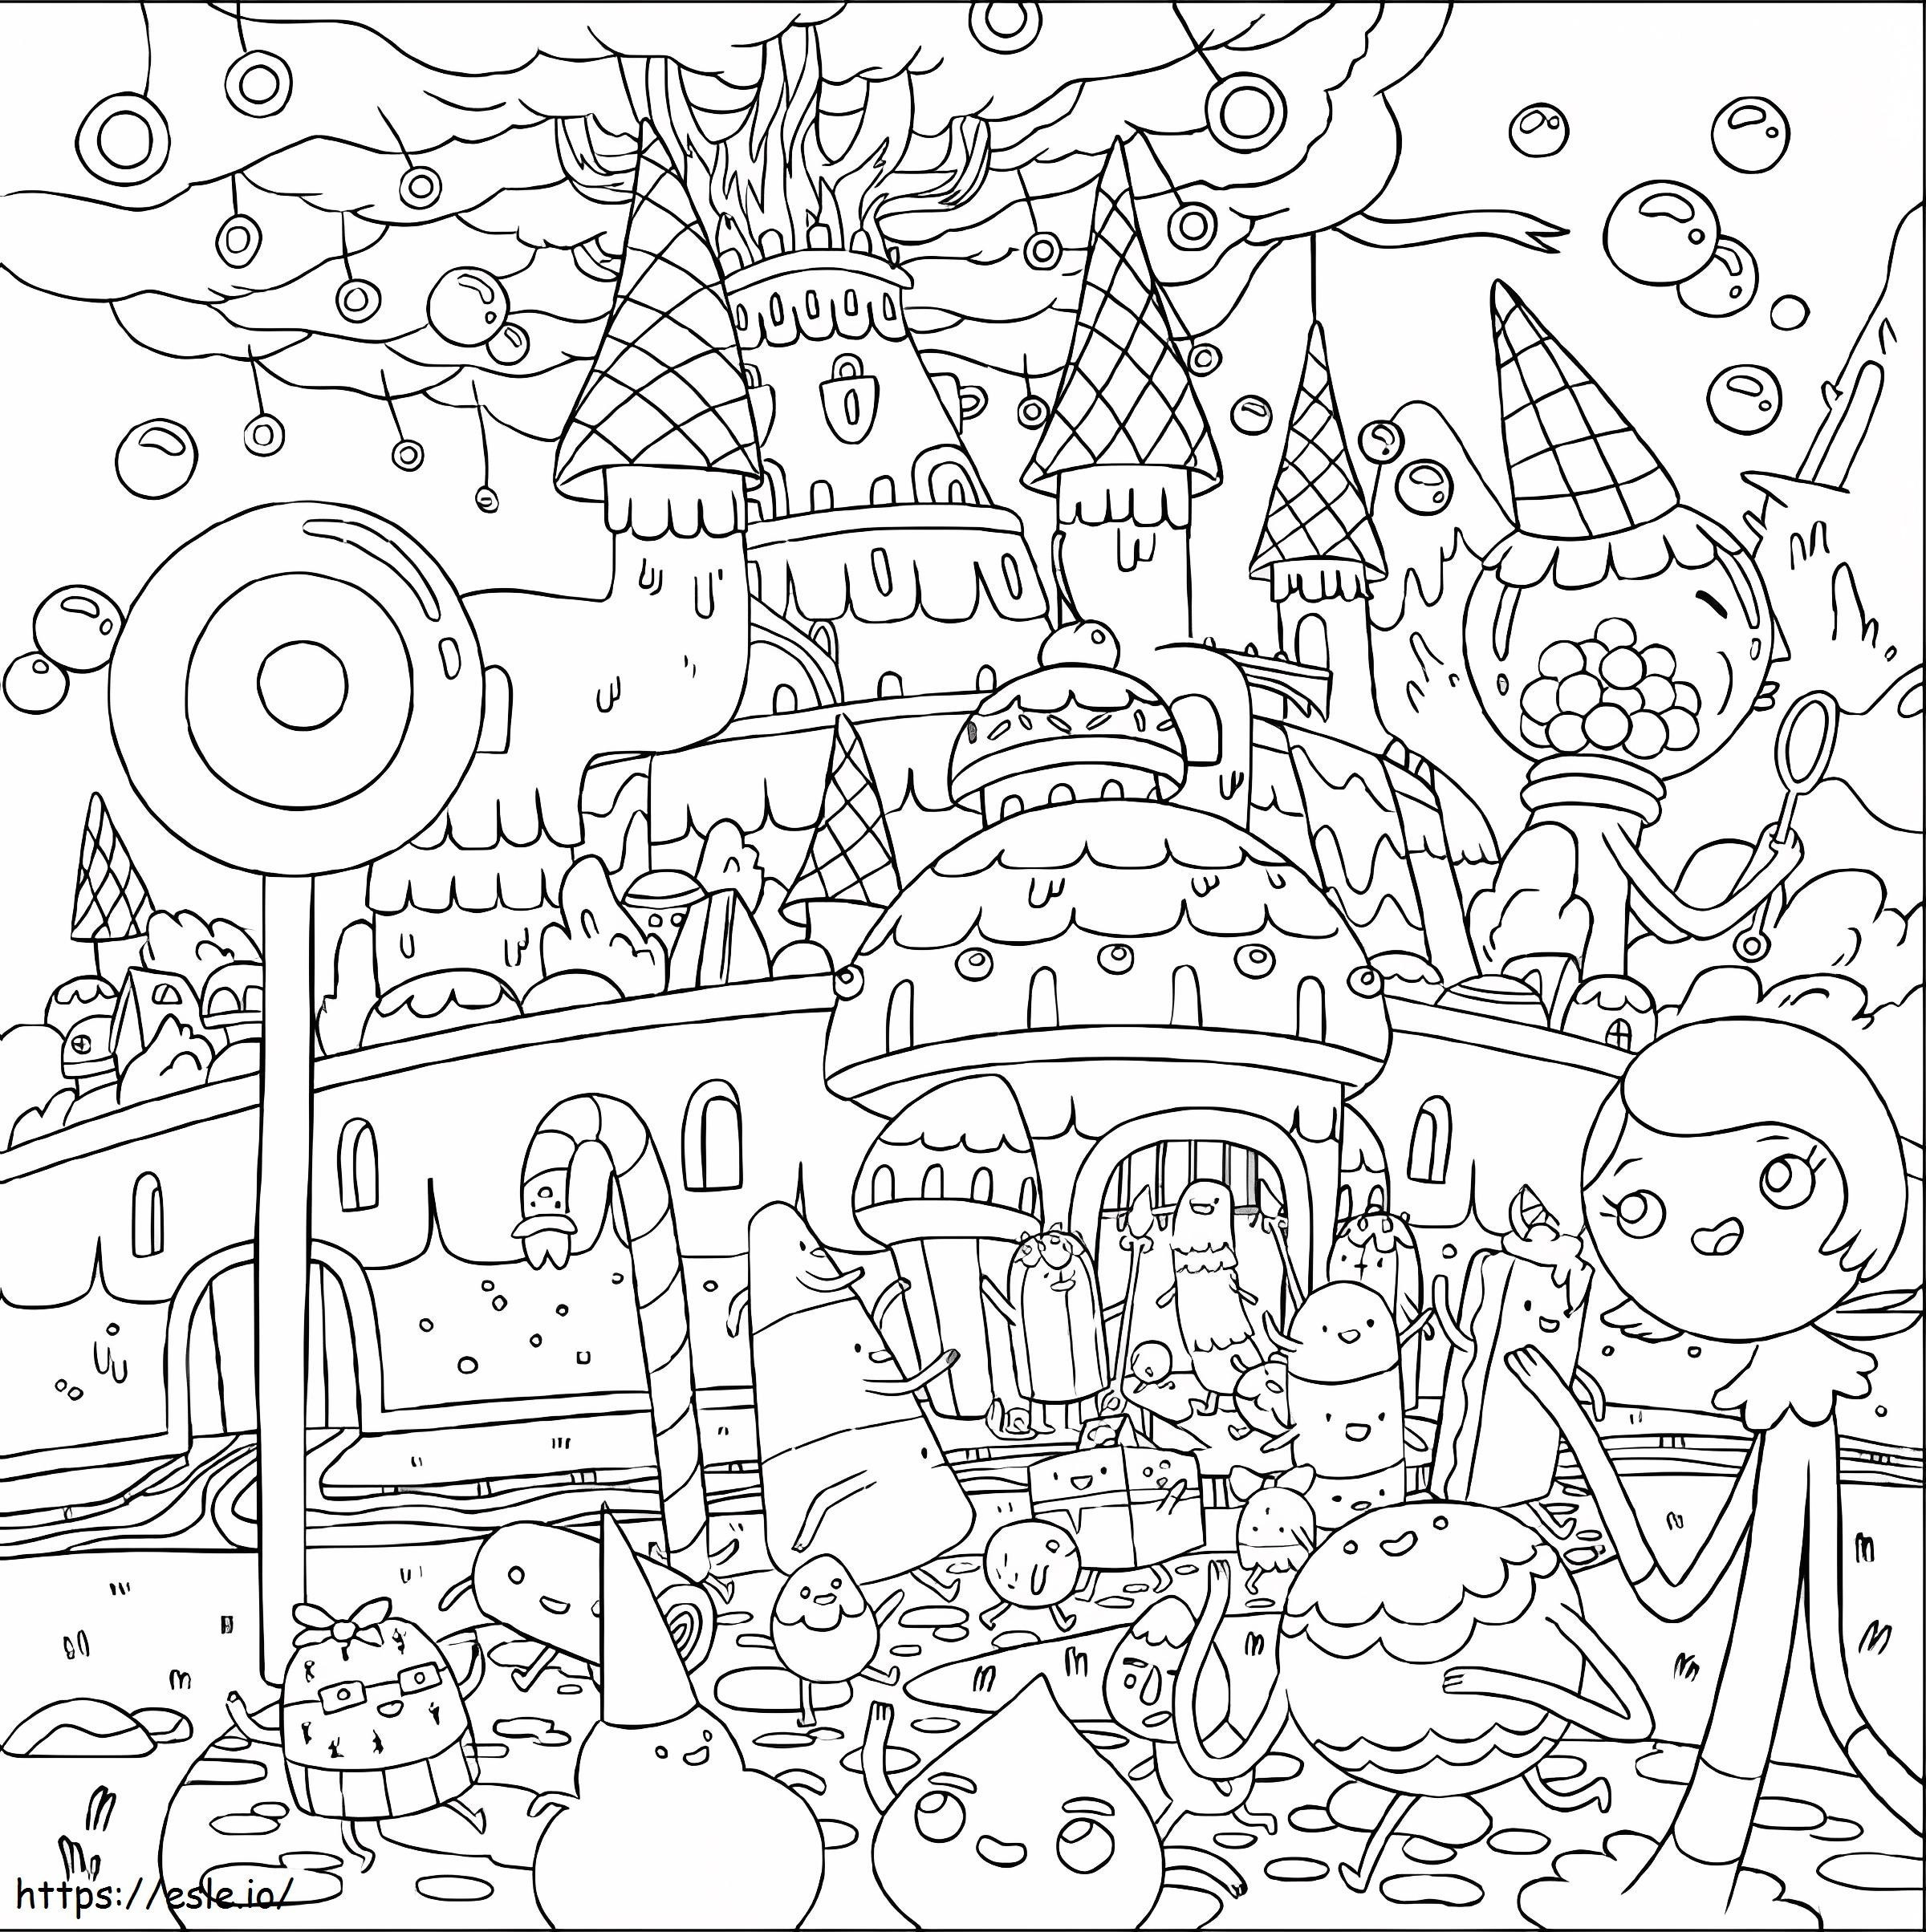 Incredible Adventure Time Characters coloring page